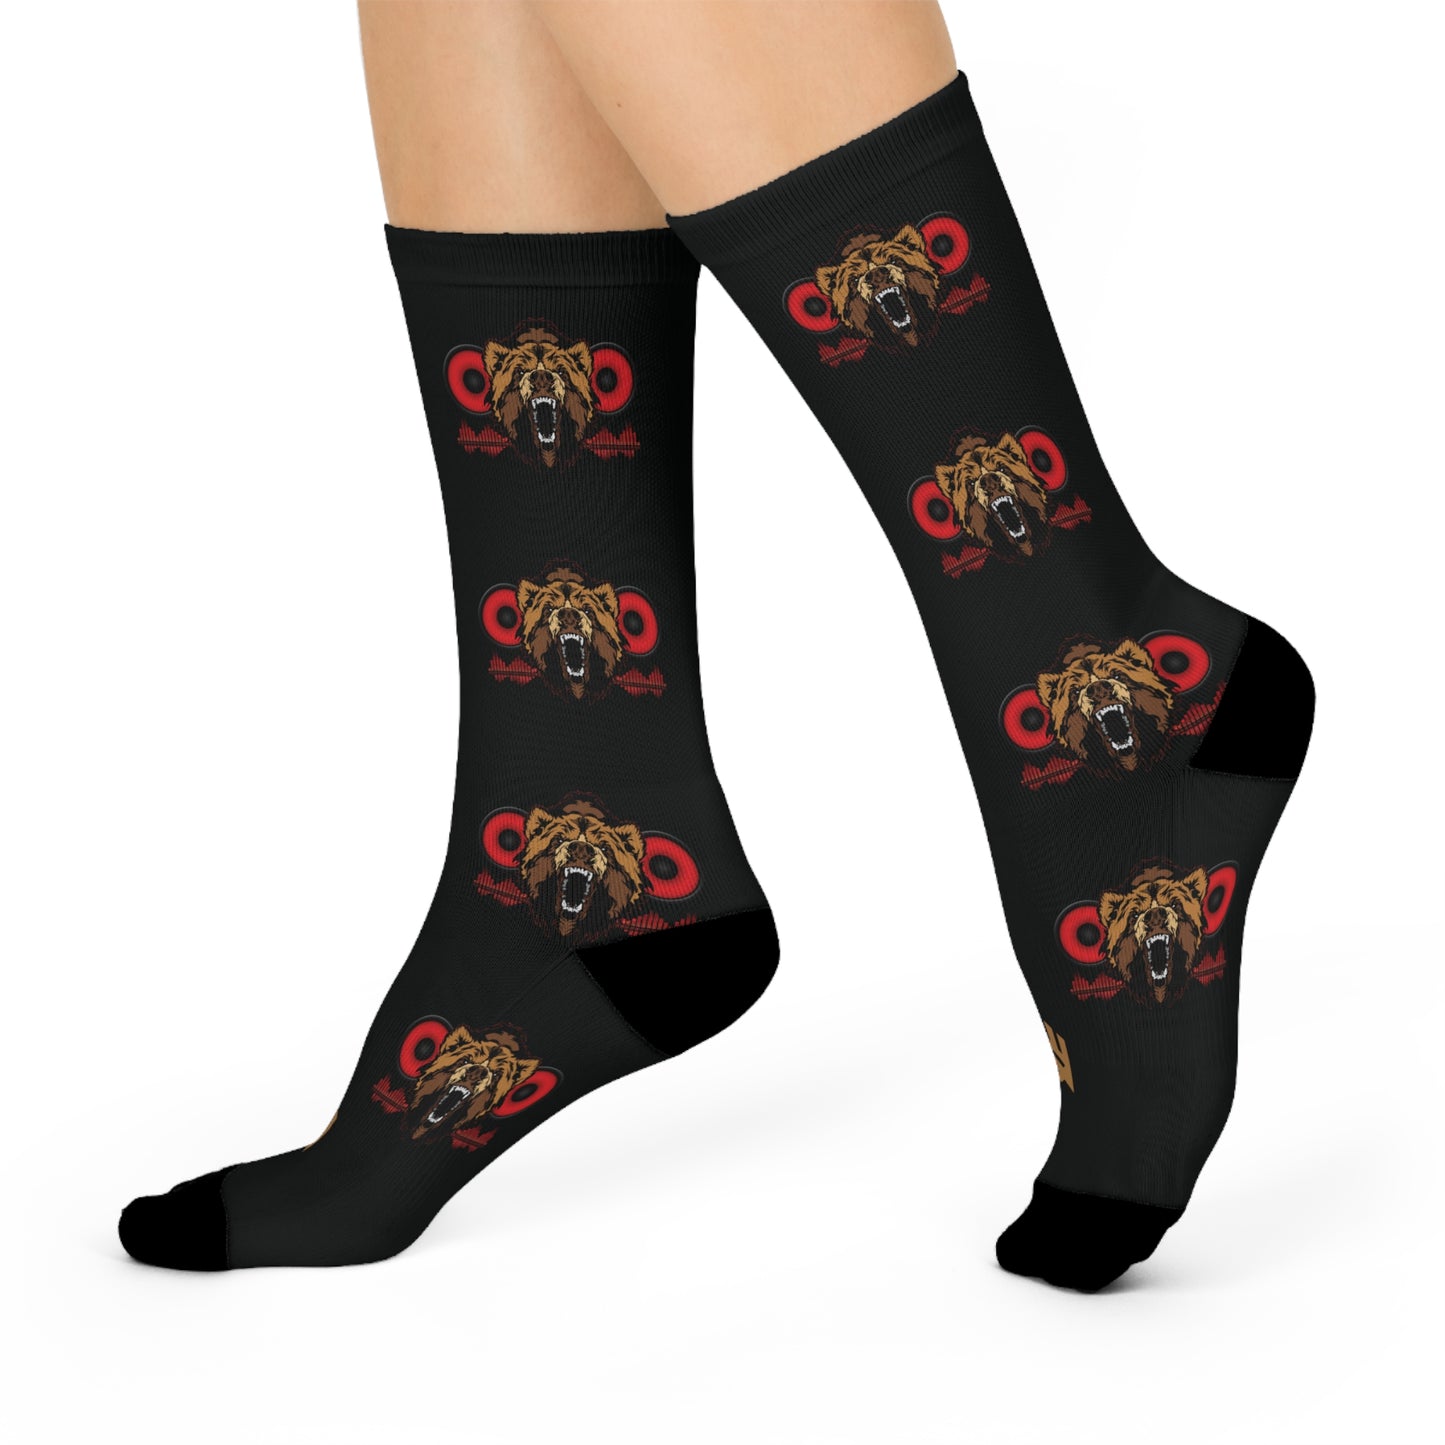 Lac Grizzy Bear Speakers DTG Crew Socks